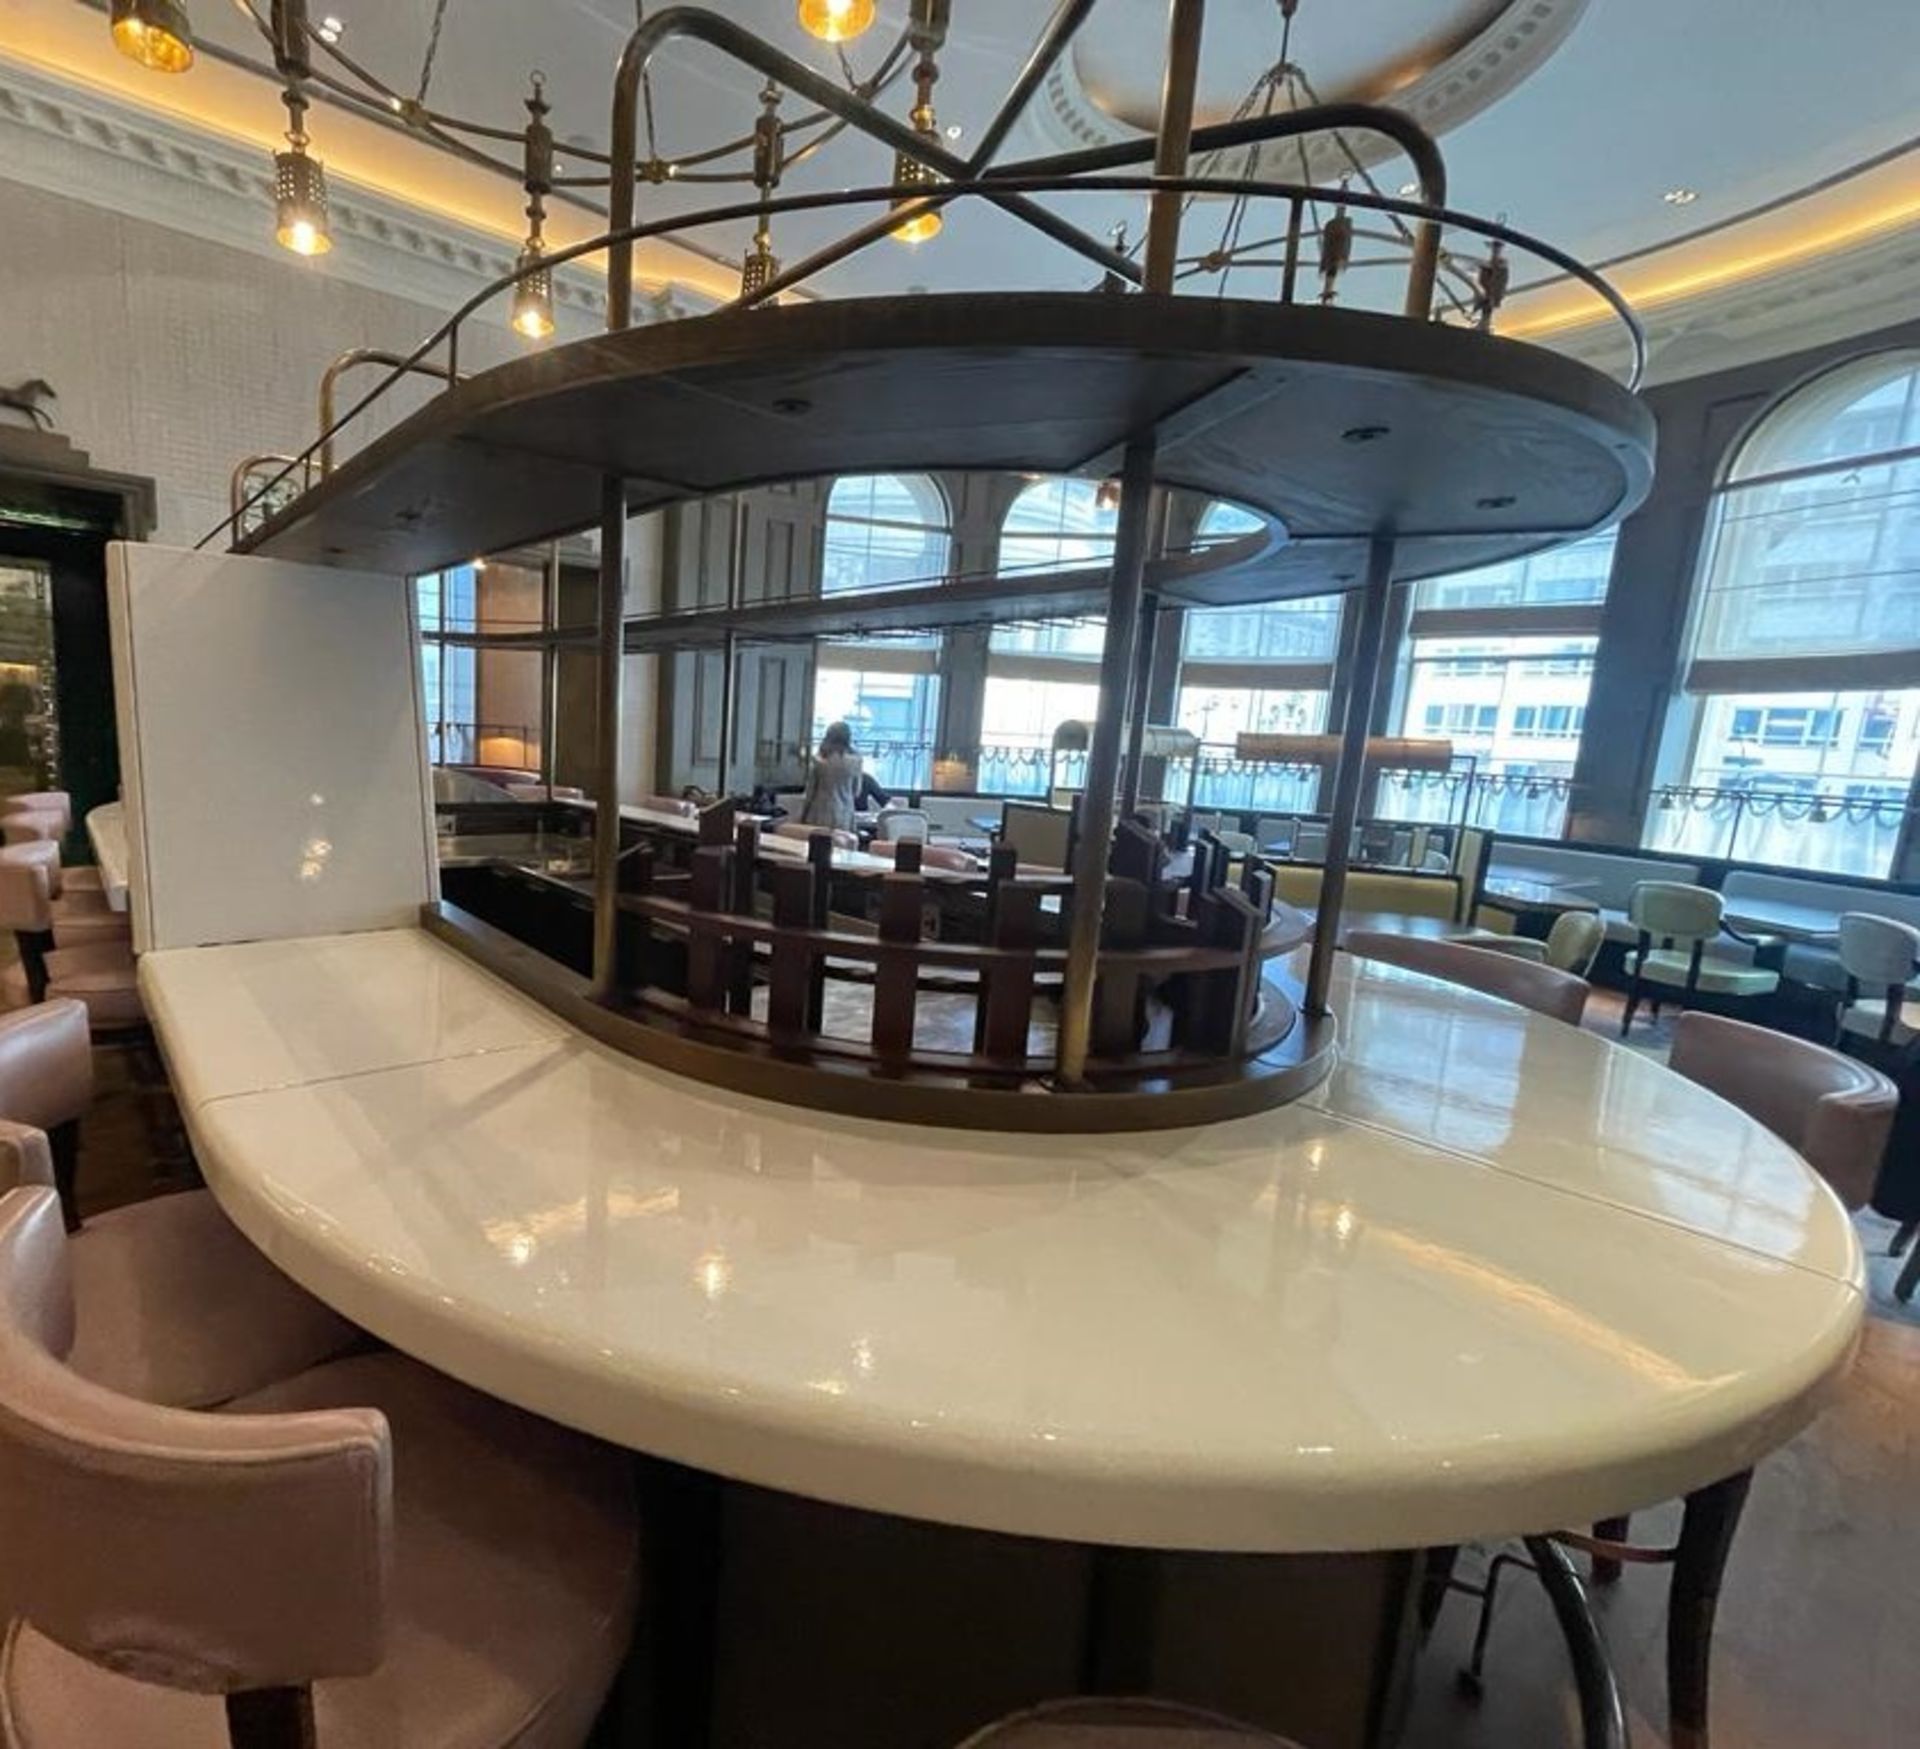 1 x Luxury Curved Restaurant 5.5-Metre Centrepiece Bar, Clad in Timber & Leather with 18 x Stools - Image 43 of 72